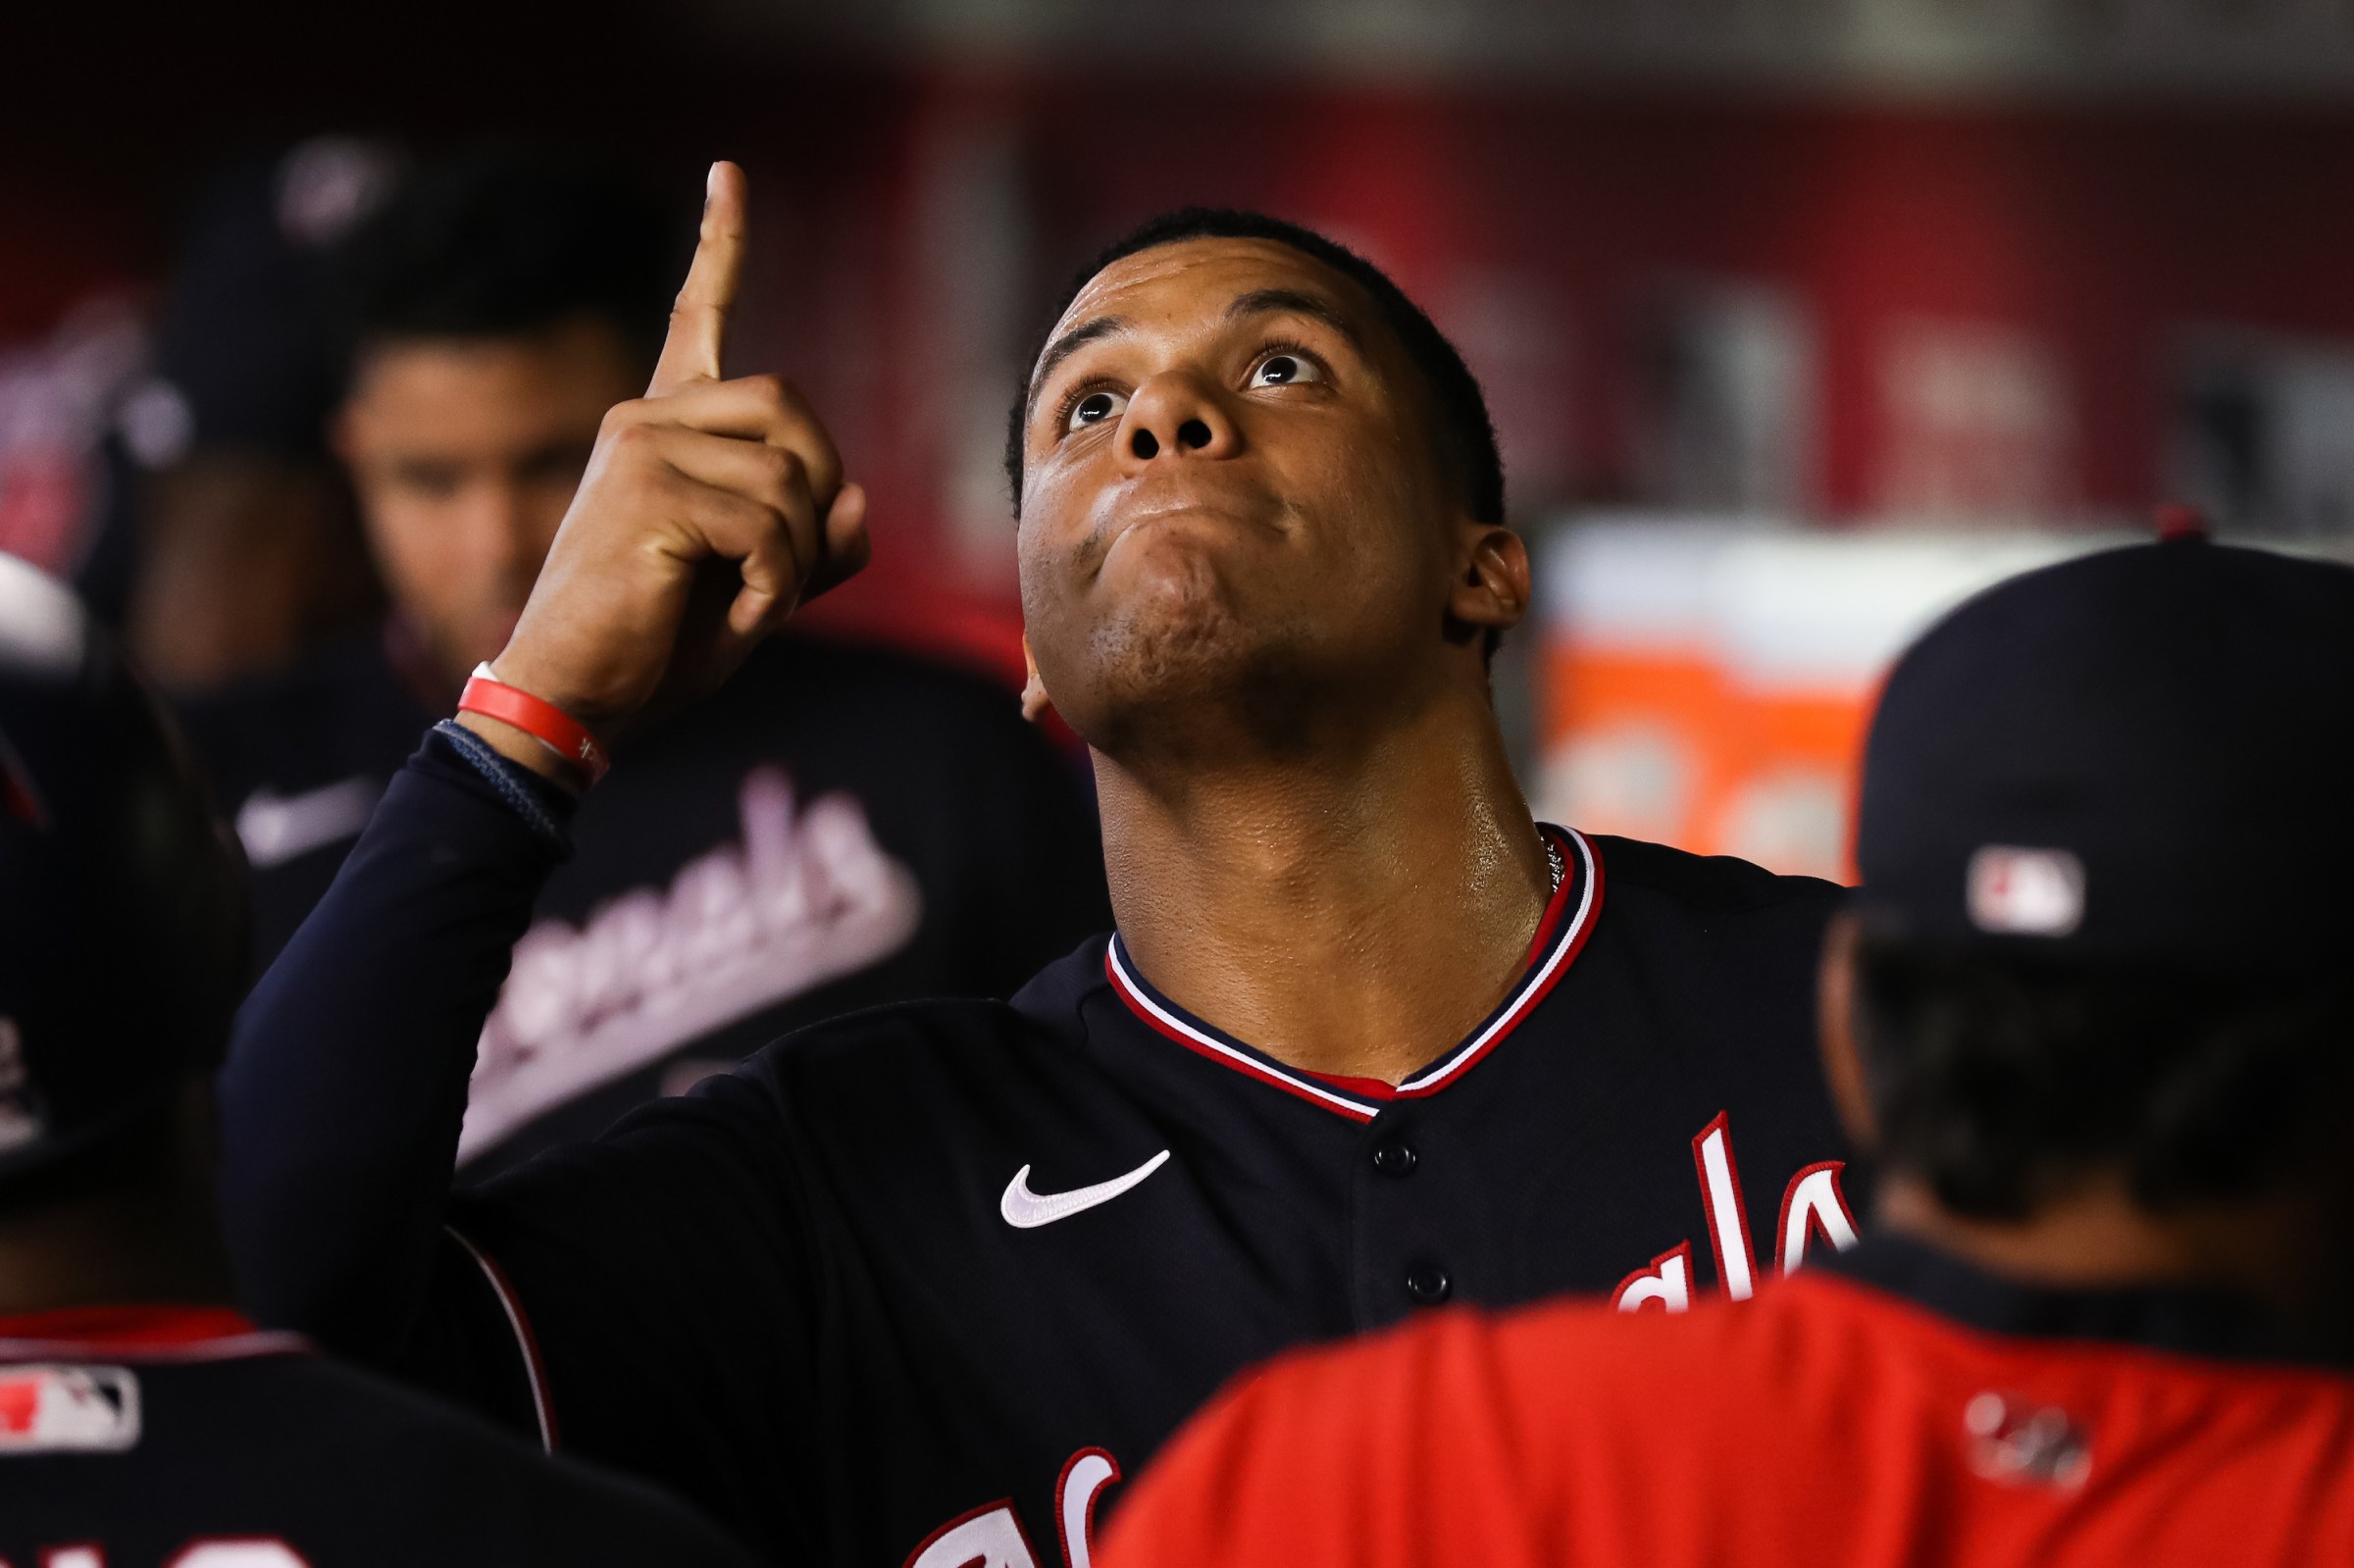 Juan Soto of the Washington Nationals, seen here pointing up.